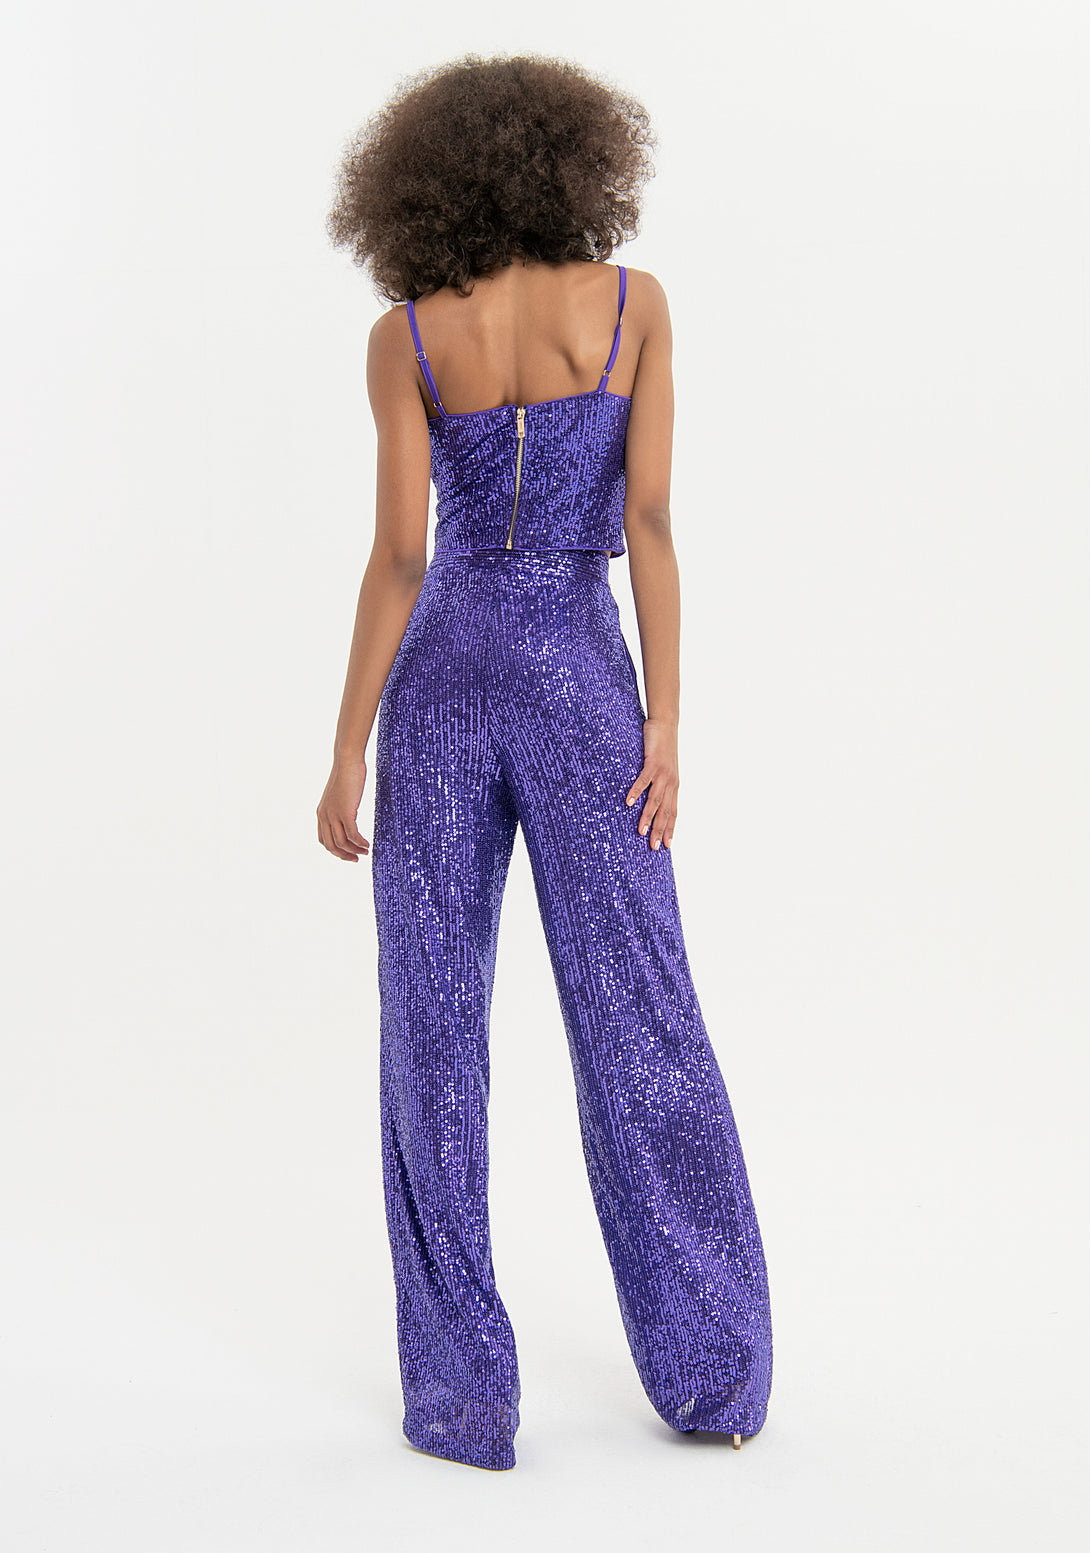 Palazzo pant wide fit made in sequins Fracomina FQ23WV3001W53601-233-4